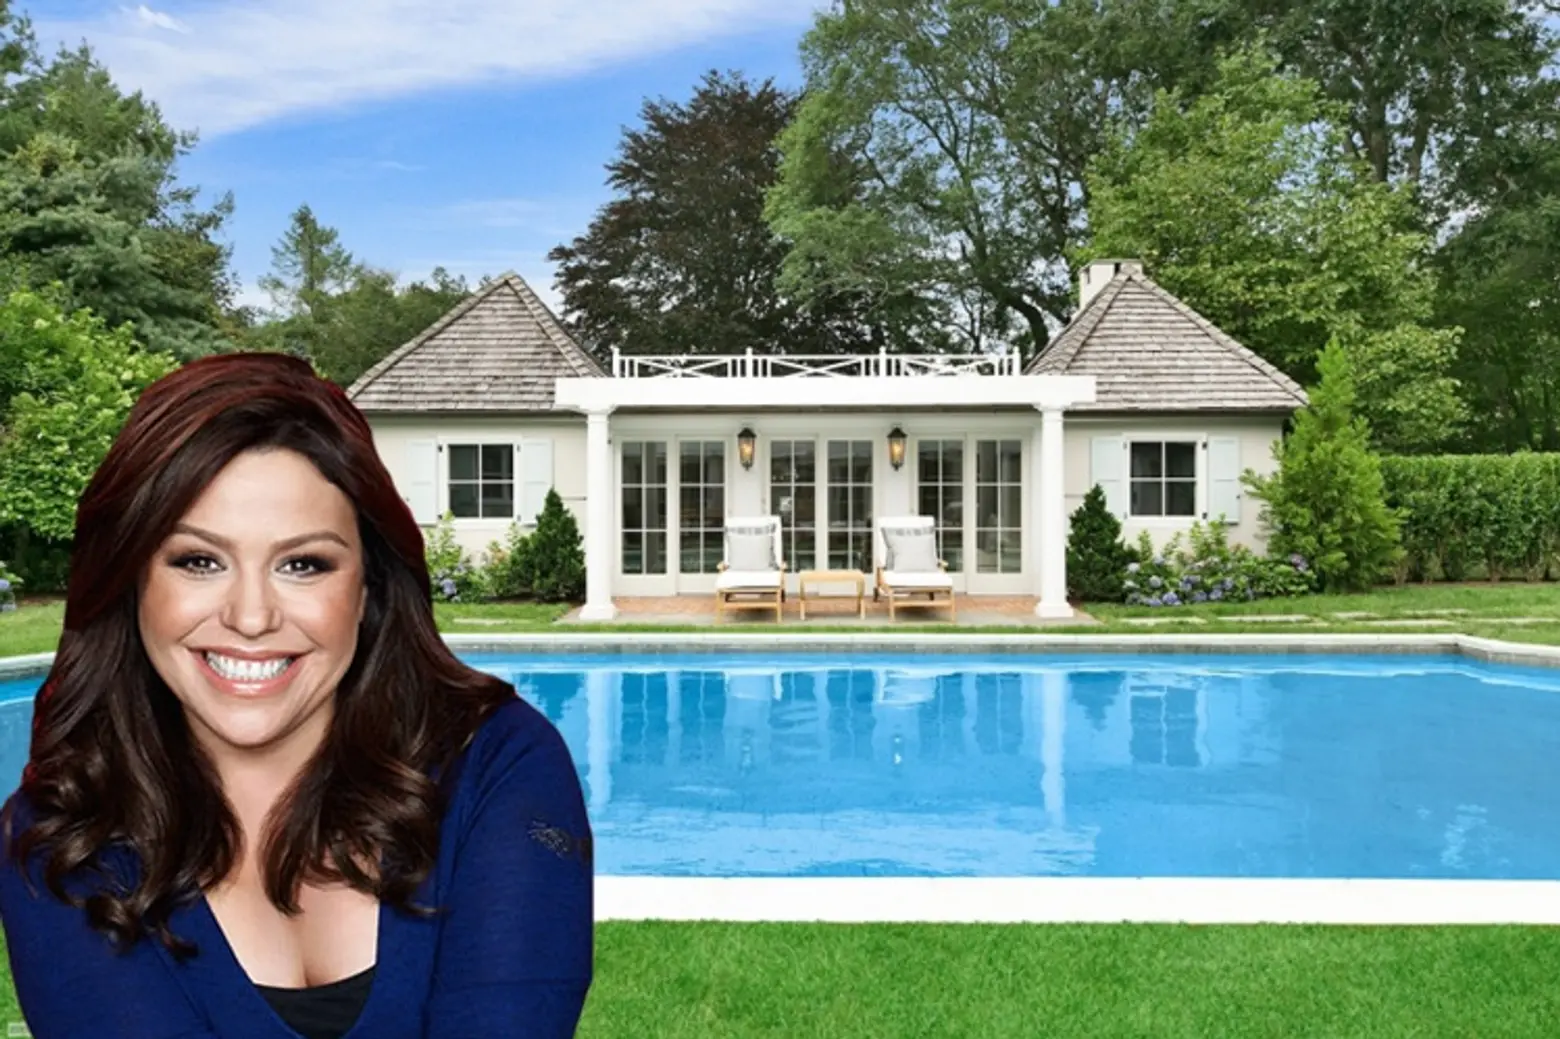 Celebrity chef Rachael Ray is selling her Southampton home for $5M